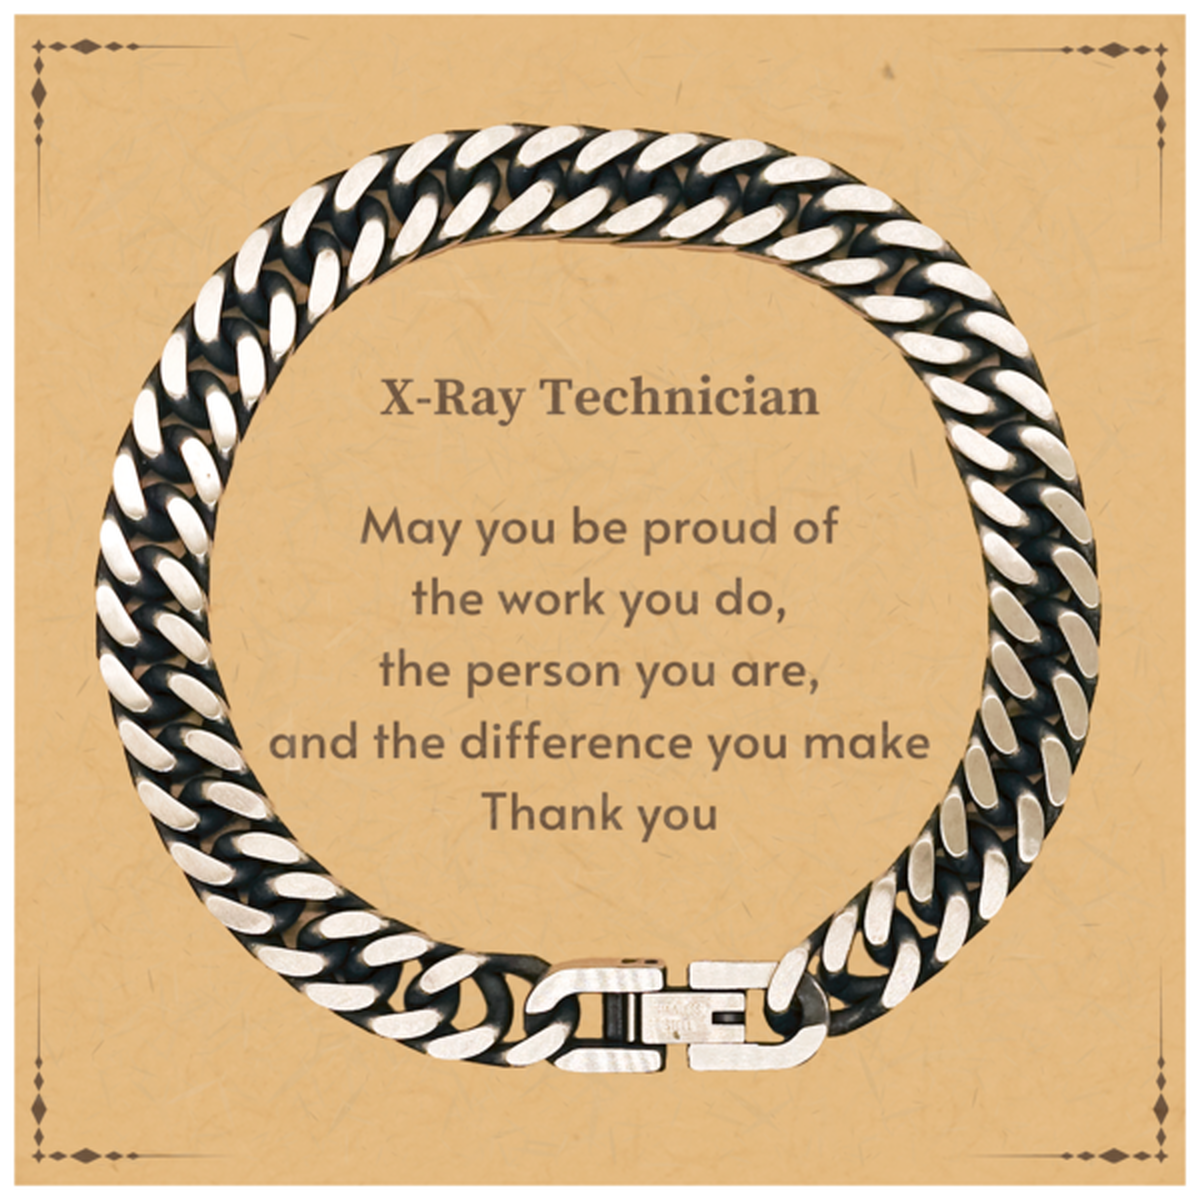 Heartwarming Cuban Link Chain Bracelet Retirement Coworkers Gifts for X-Ray Technician, X-Ray Technician May You be proud of the work you do, the person you are Gifts for Boss Men Women Friends